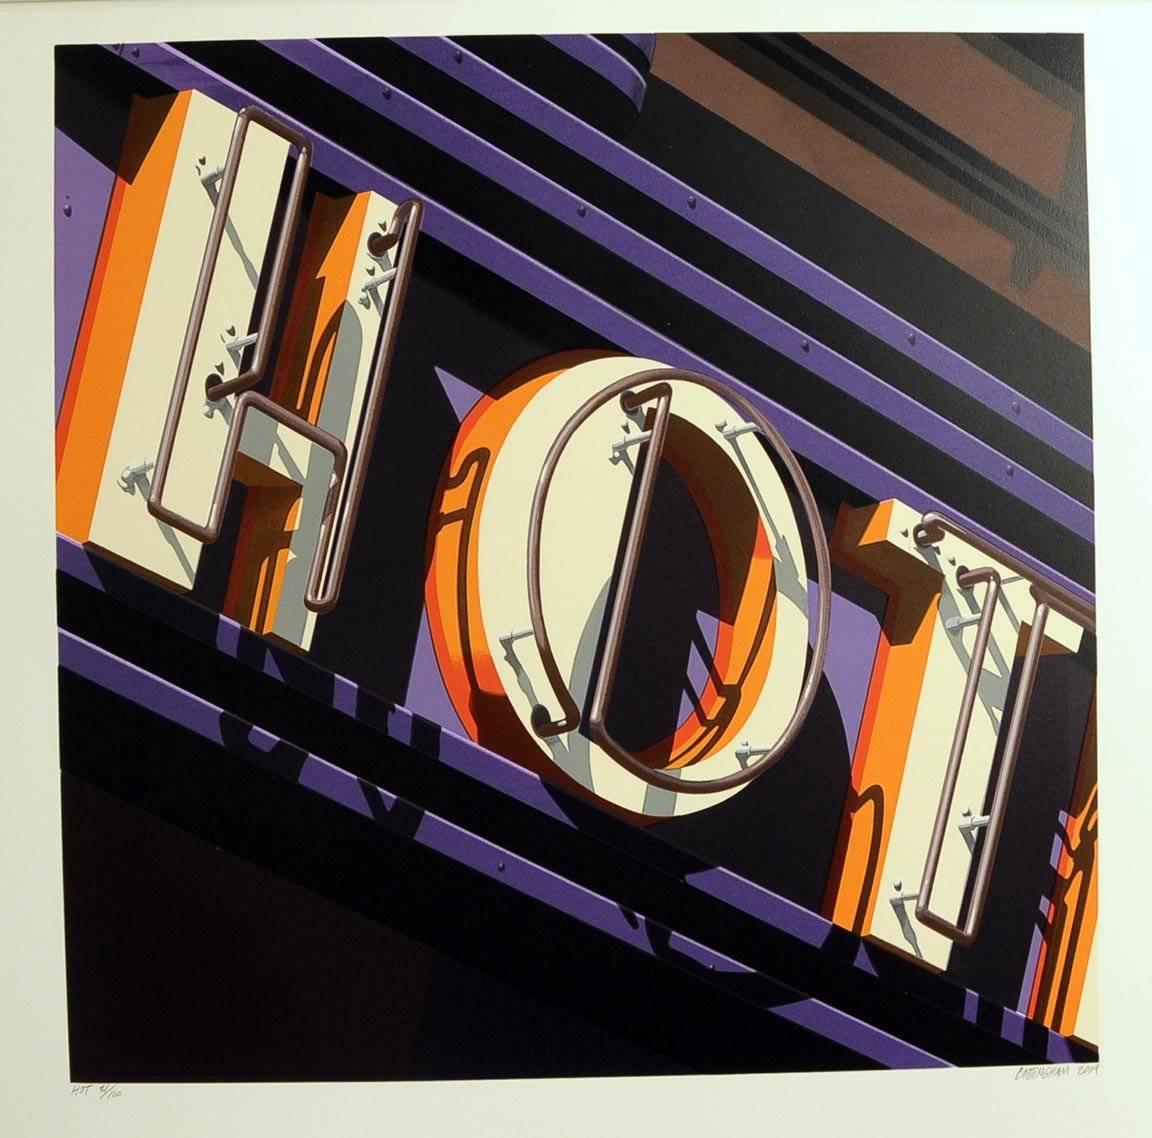 Hot, from American Signs Portfolio - Photorealist Print by Robert Cottingham